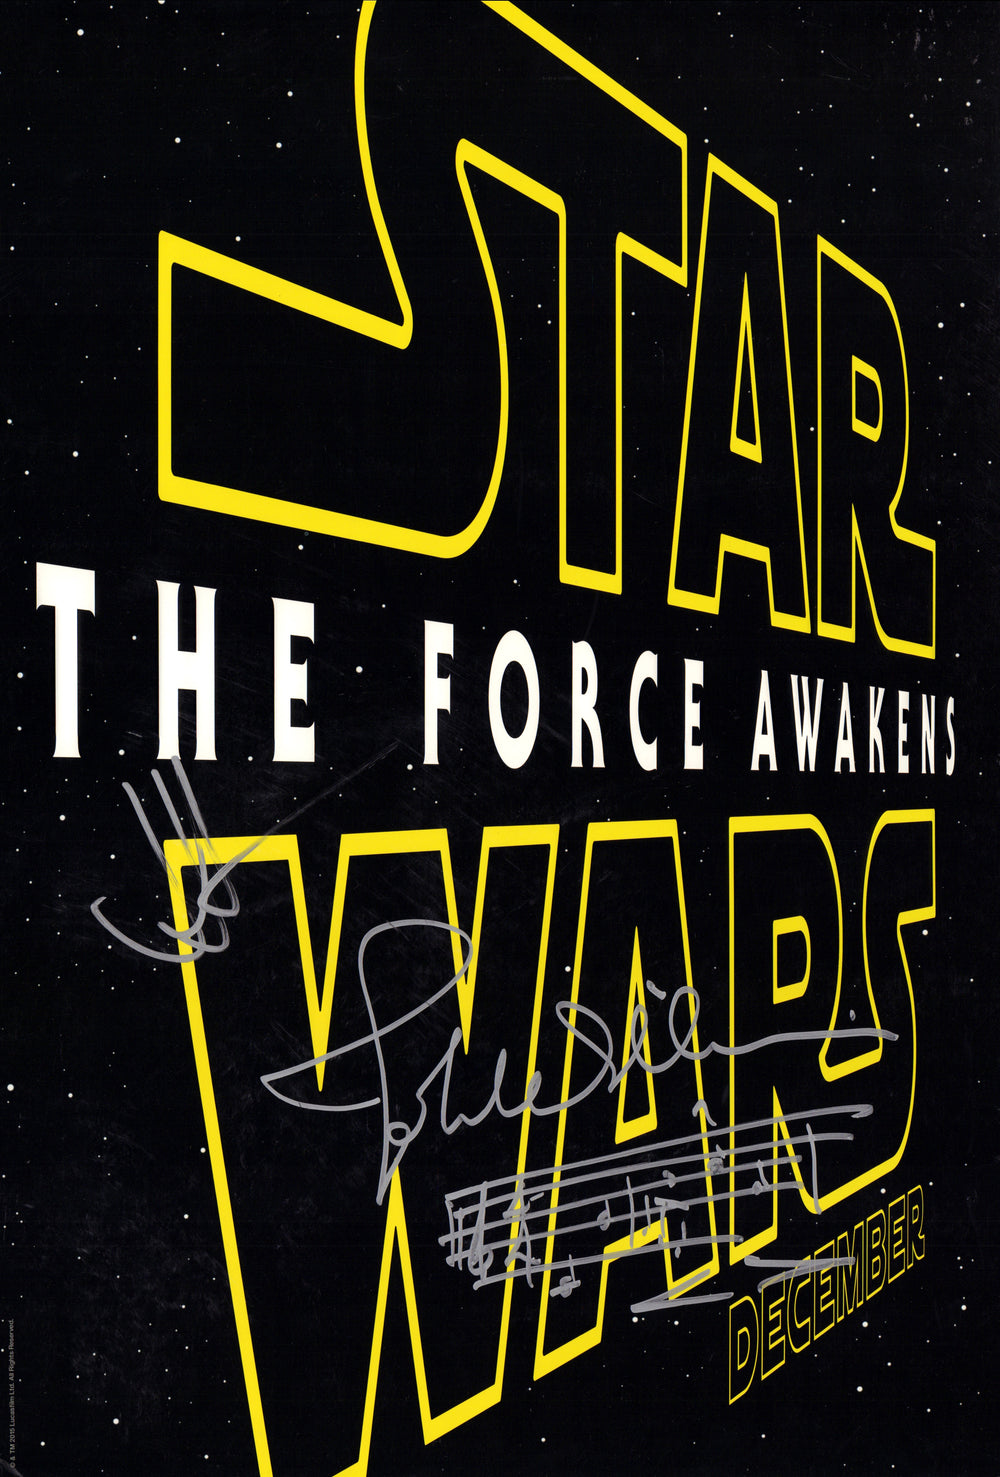 Star Wars: The Force Awakens 13x19 Mini Poster Signed by Director J.J. Abrams and Composer John Williams with Rare AMQS Handwritten Musical Notes of the Star Wars Theme